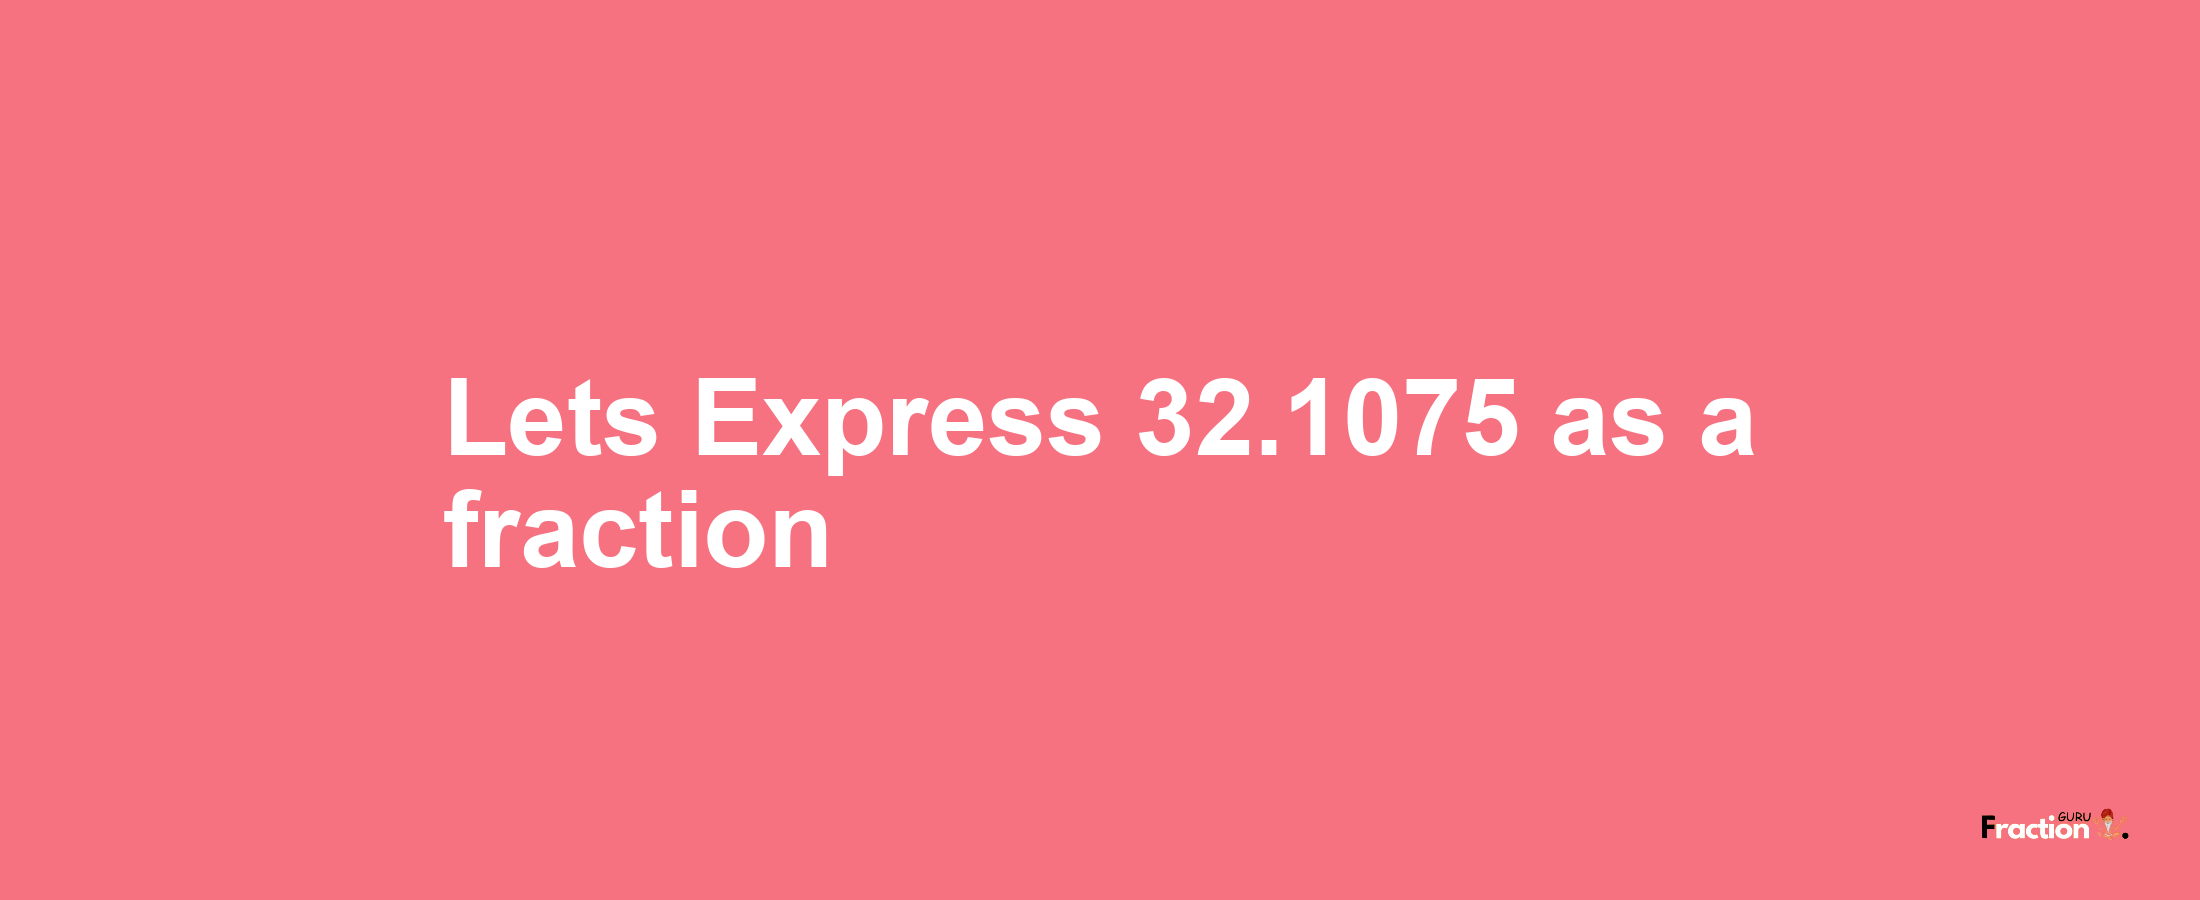 Lets Express 32.1075 as afraction